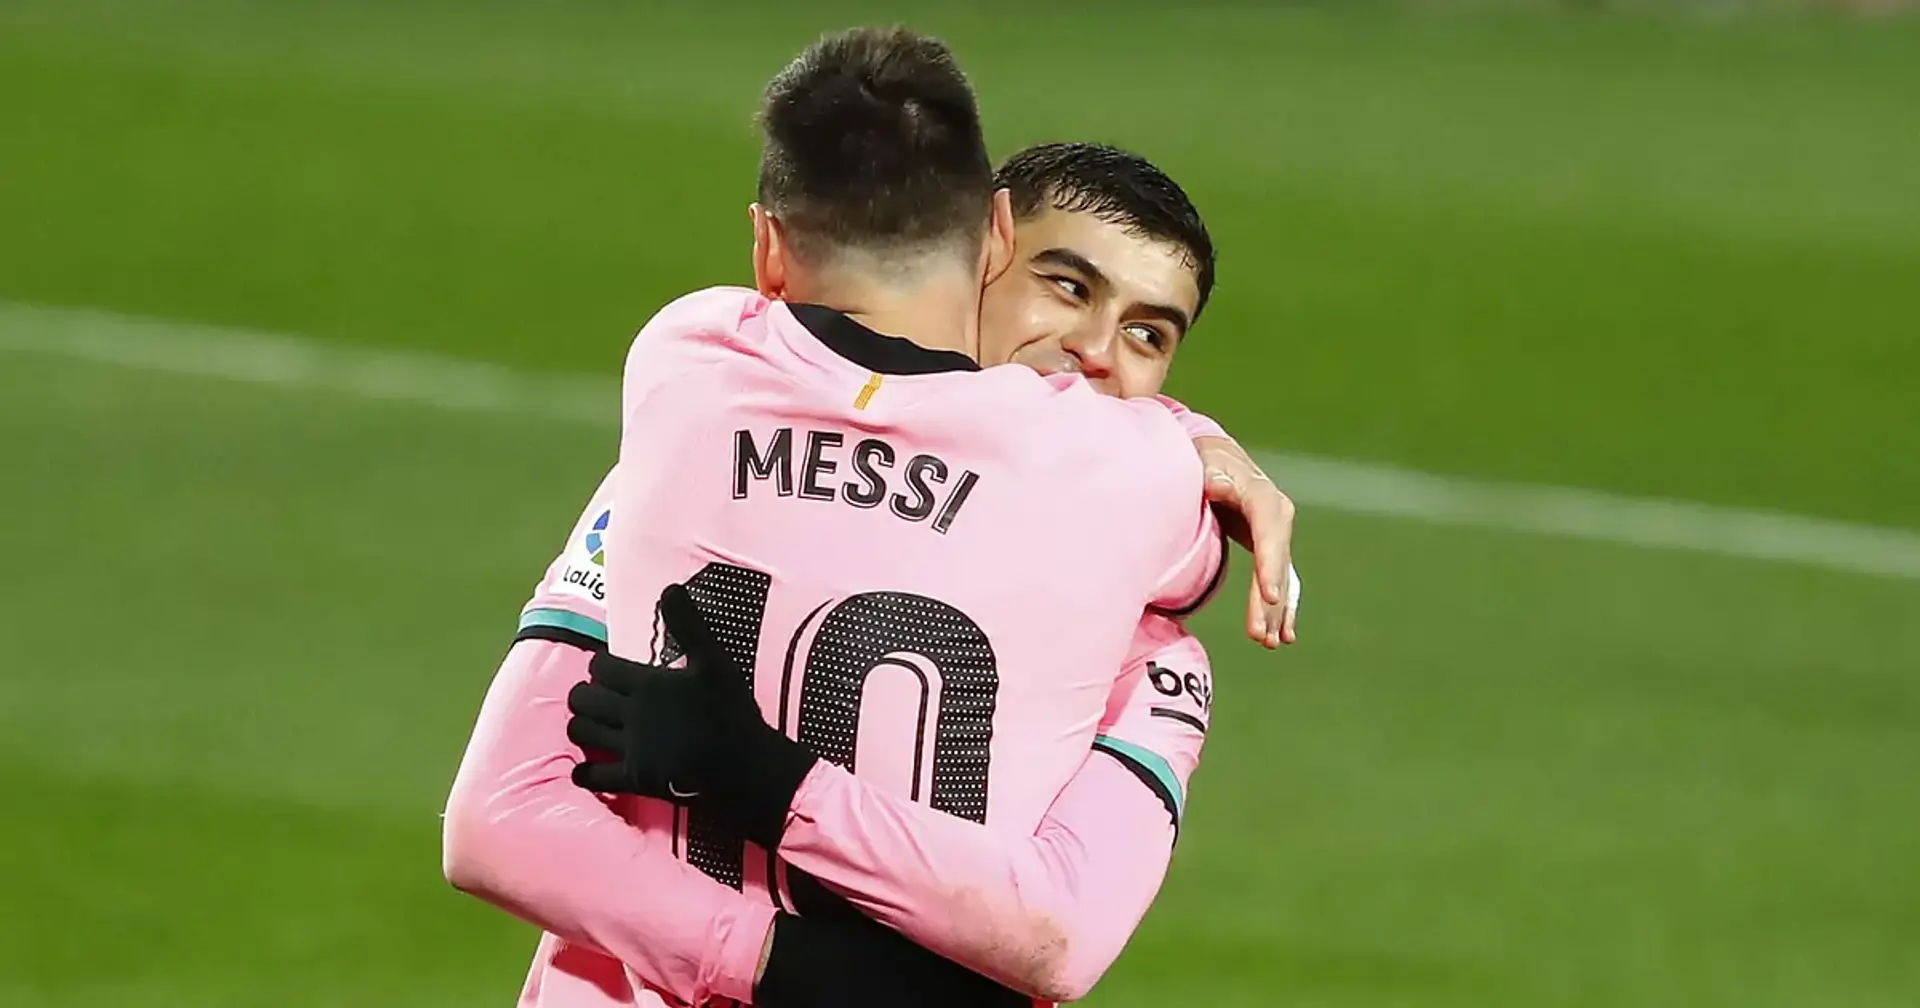 Pedri overcomes Messi to become Barca's 3rd youngest player to make assist in La Liga - take a look at top 5